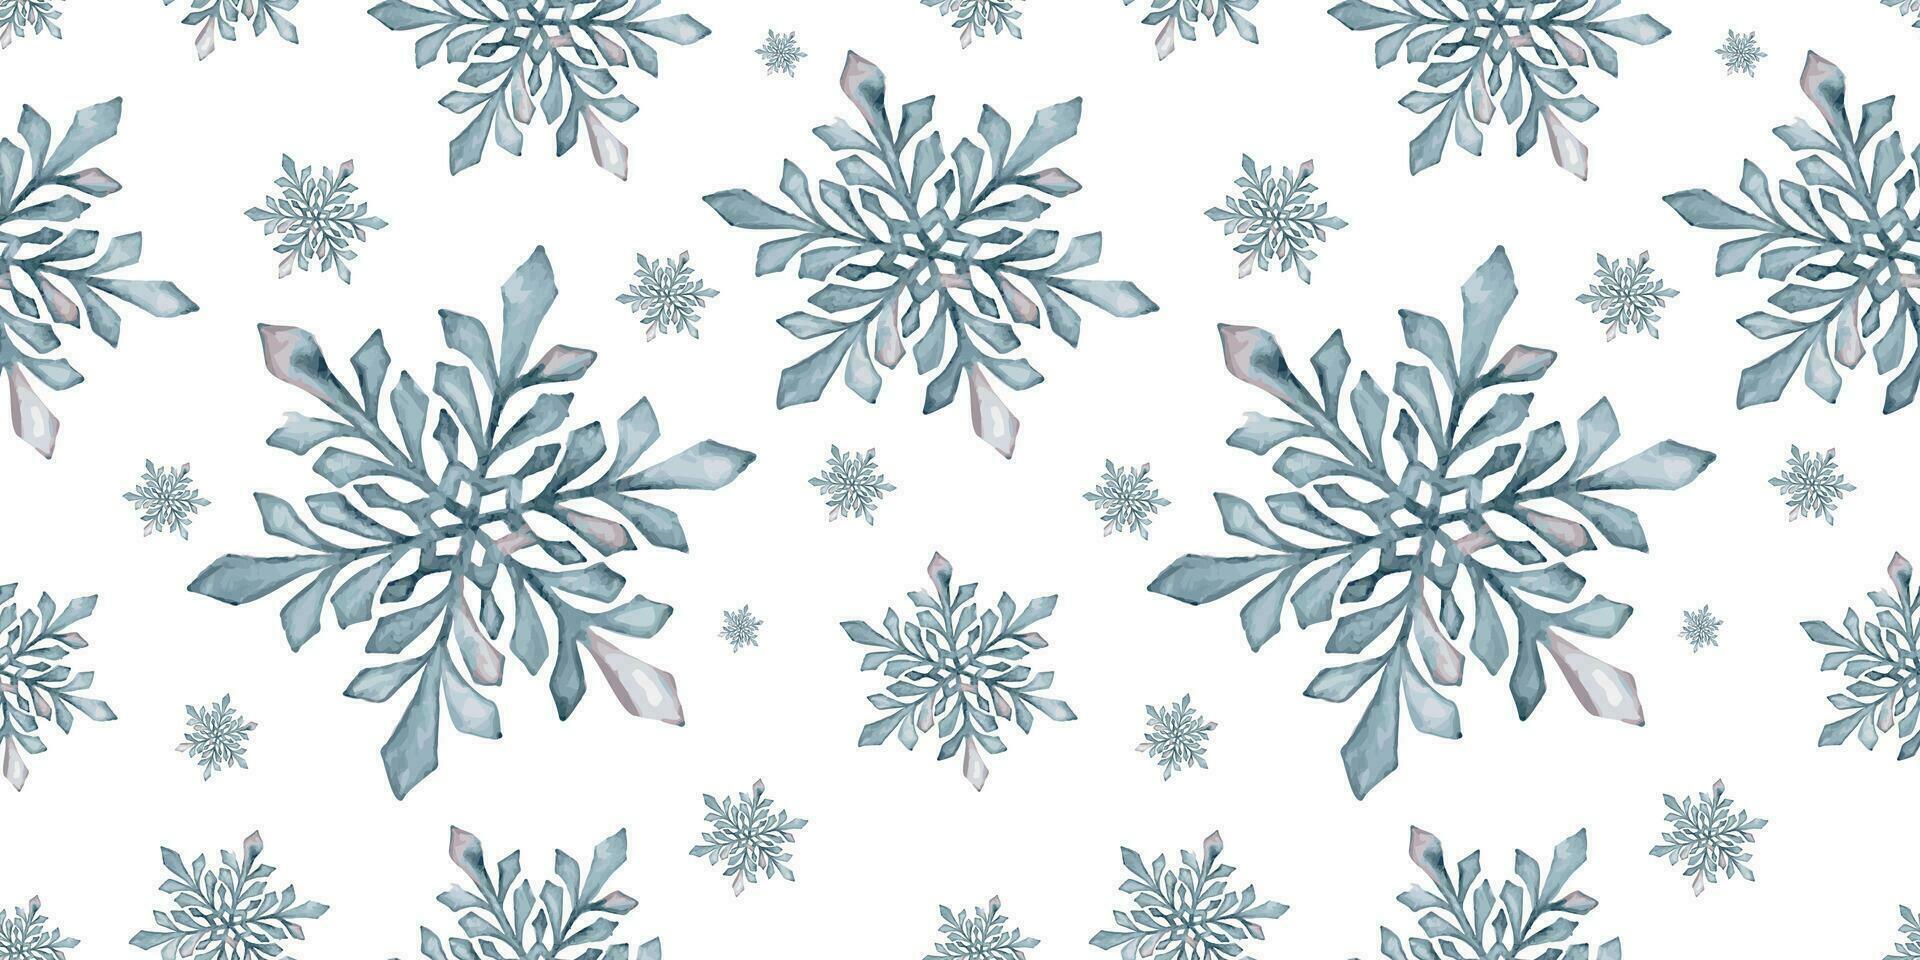 Watercolor hand drawn seamless pattern with blue, teal and rose colored snowflakes. Christmas New Year snow design for holiday greeting cards, print, textile, sale, web, design and wrapping paper. vector